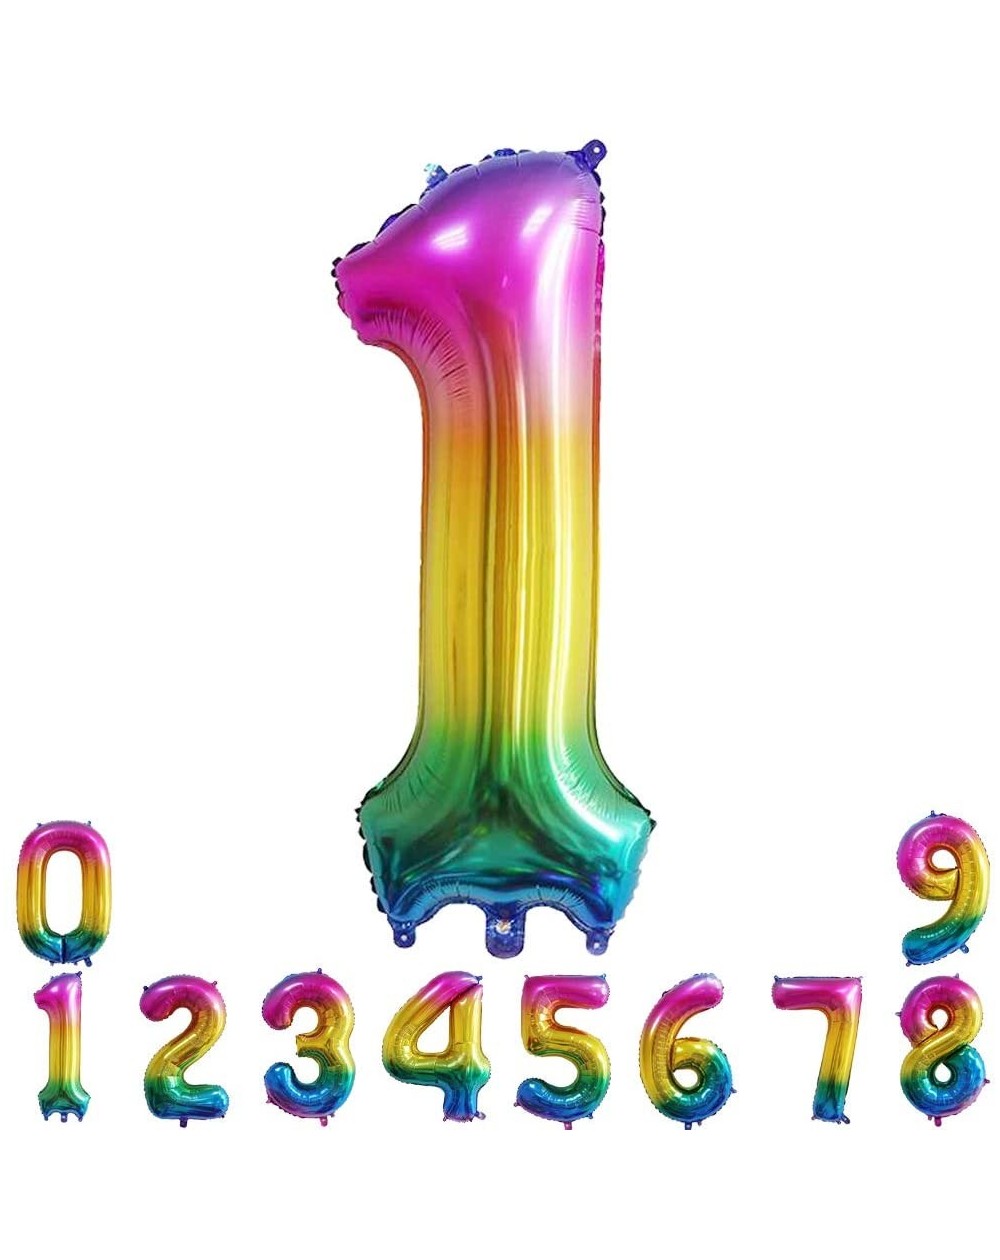 Balloons 40 Inch Large Rainbow Balloon Number 1 Balloon Helium Foil Mylar Balloons Party Festival Decorations Birthday Annive...